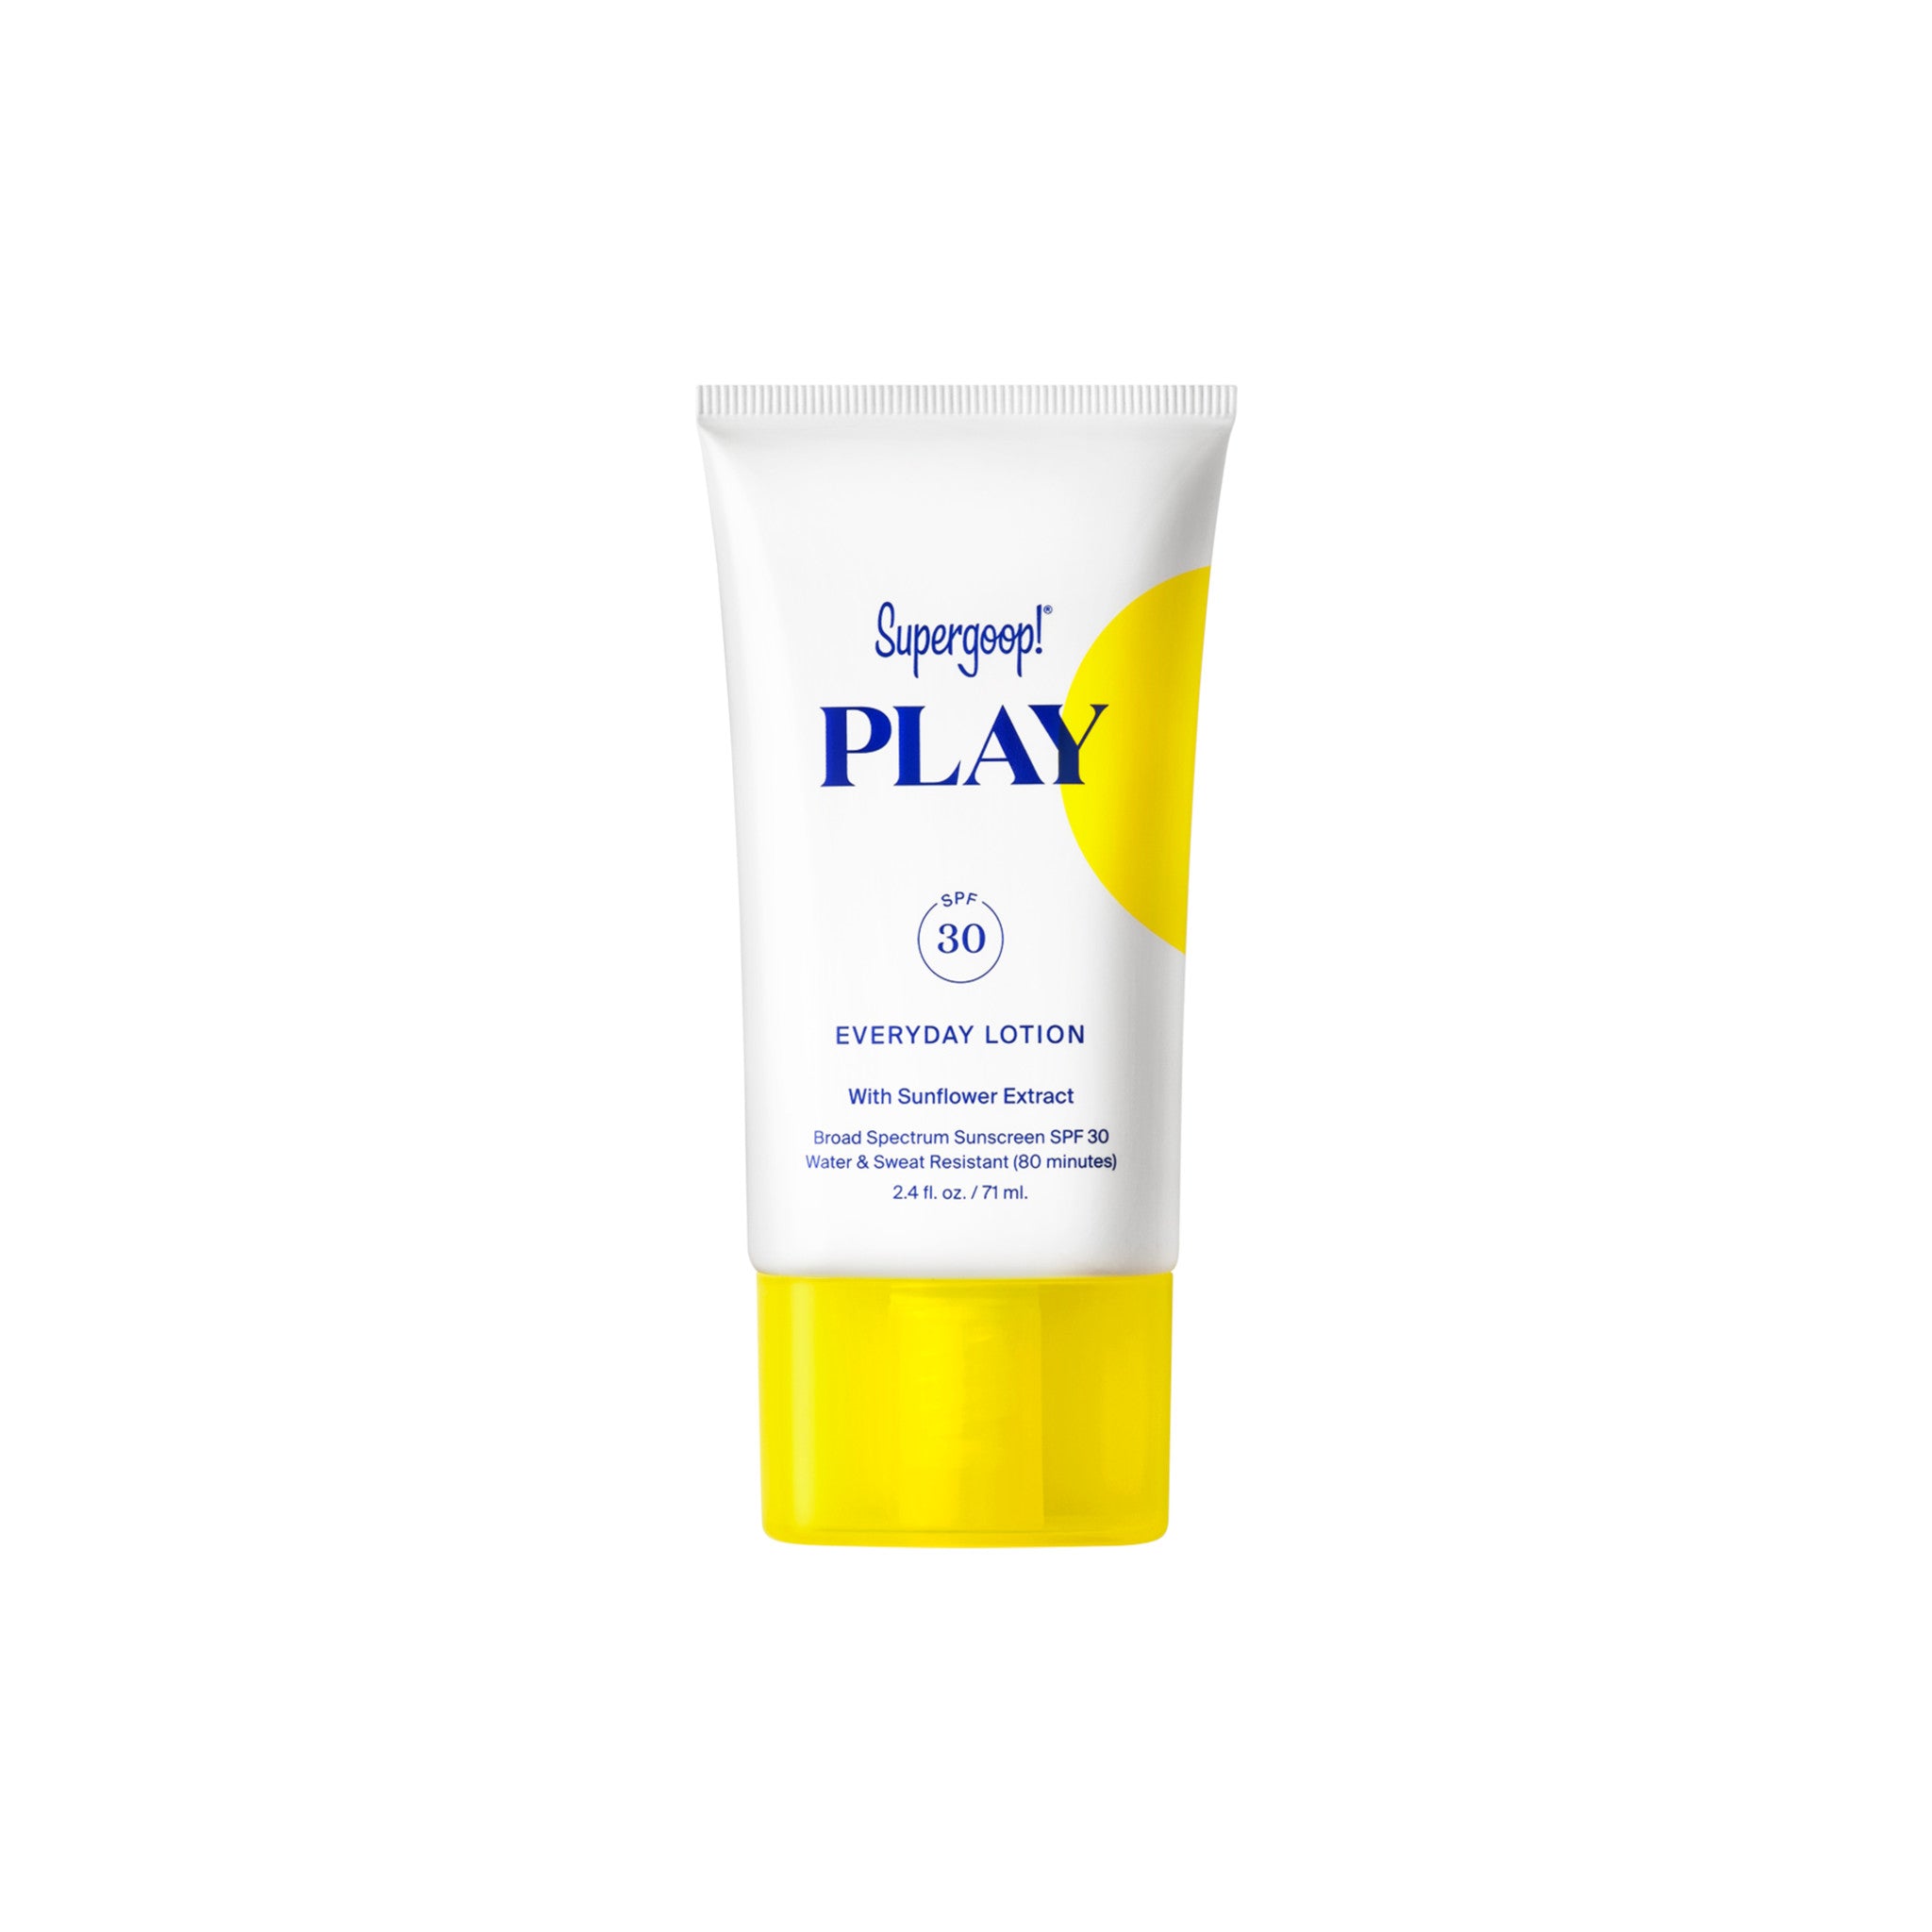 Supergoop! Play Everyday Lotion With Sunflower Extract SPF 30 Size variant: 2.4 fl oz main image.